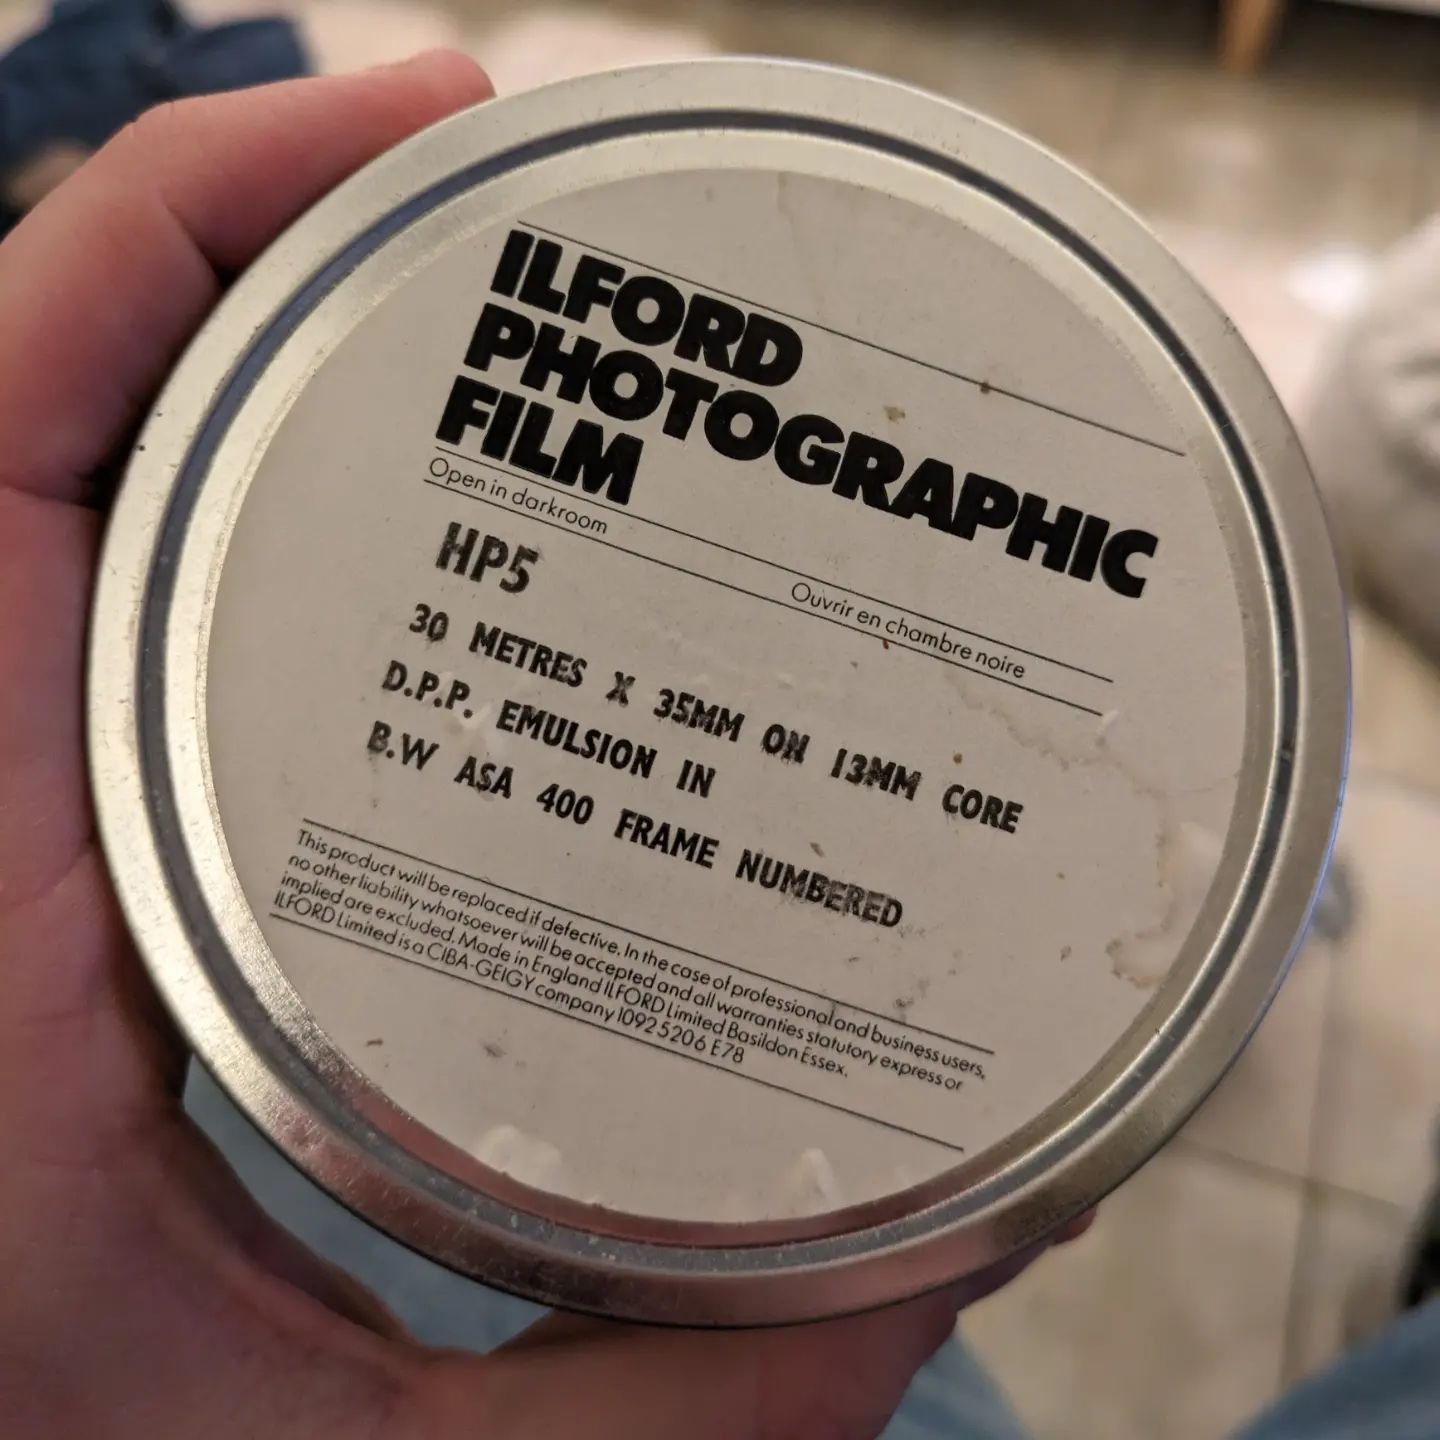 About to be very busy bulk loading film! All freezer stored and purchased from a reliable source! Looking forward to shooting all this black and white.

Also excited to bulk roll the film that's currently in the bulk loaders I have. One I know is Ekt